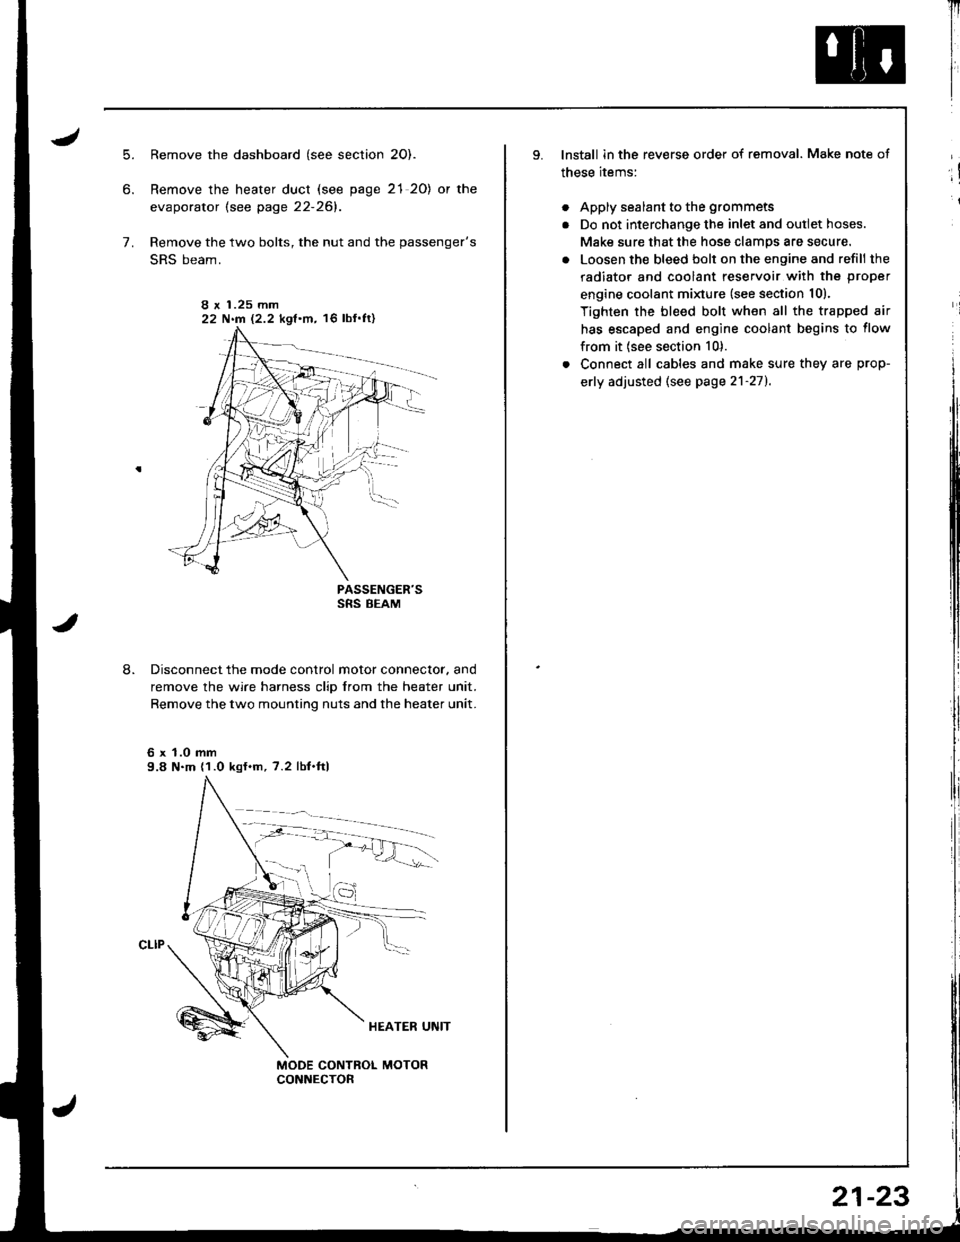 HONDA INTEGRA 1998 4.G Workshop Manual .J
5.
6.
7.
8.
Remove the dashboard (see section 2O).
Remove the heater duct (see page 21 20) or the
evaporator lsee page 22-261.
Remove the two bolts, the nut and the passengers
SRS beam.
PASSENGER